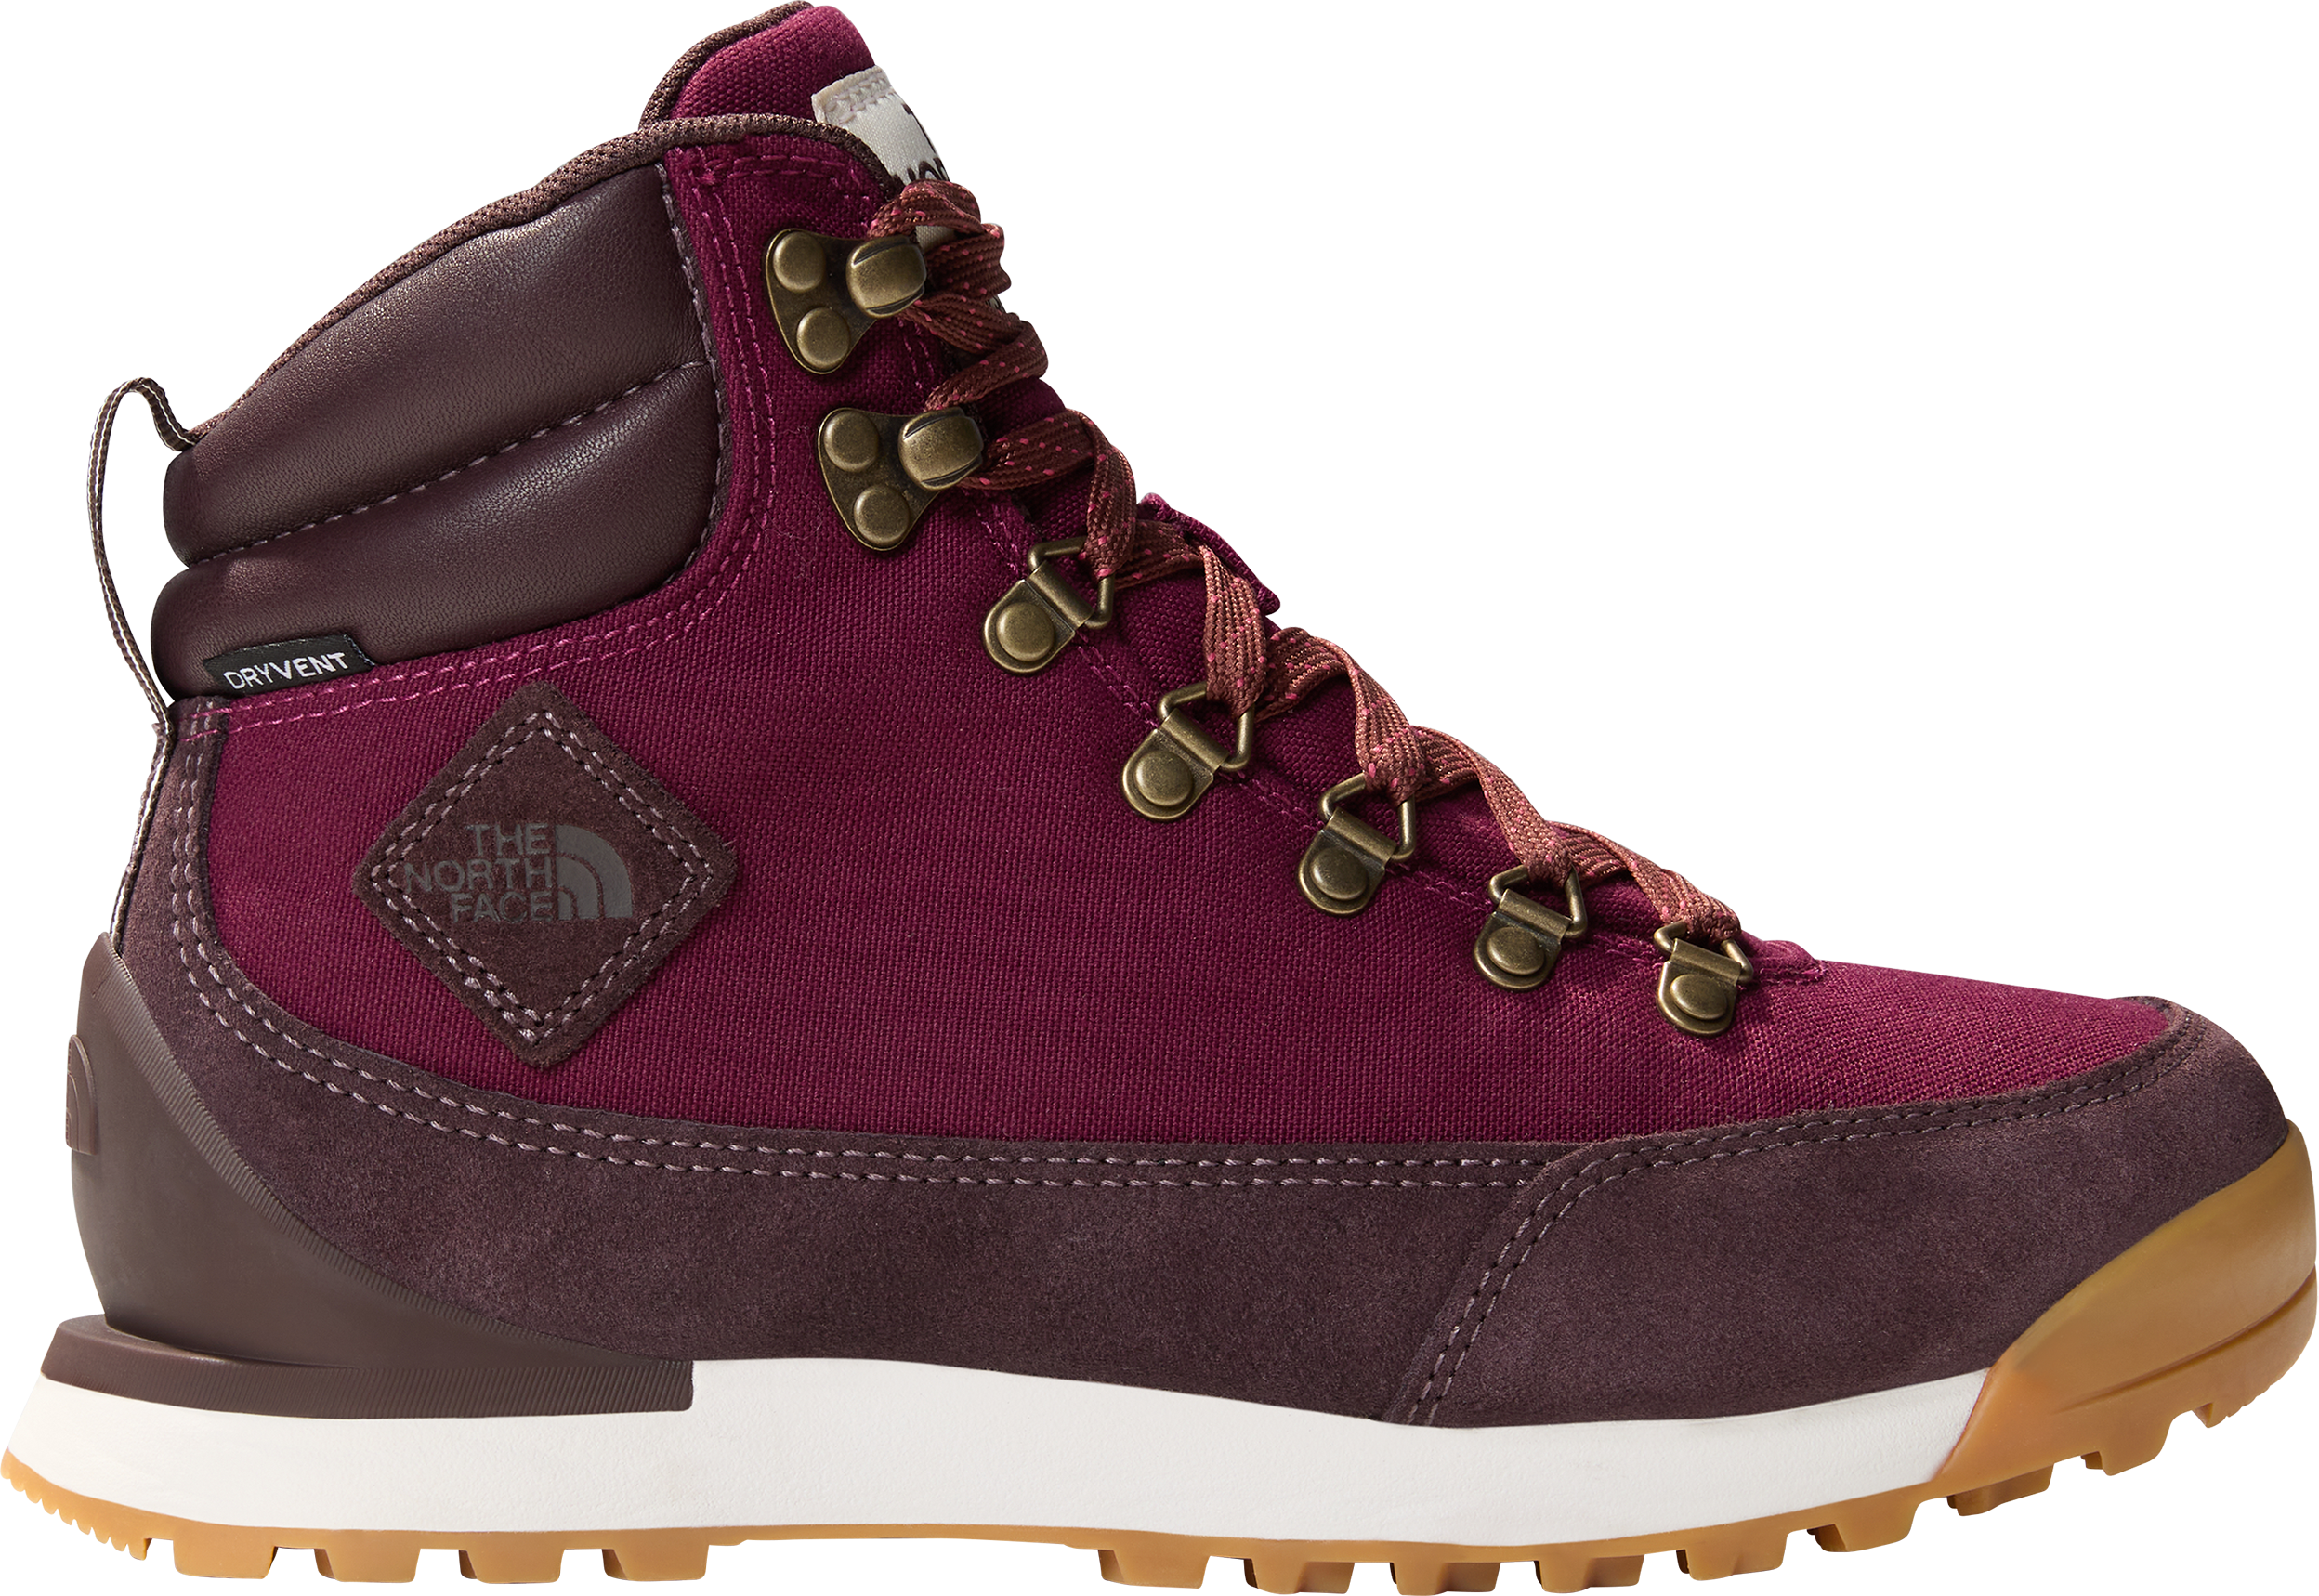 Women’s Back-to-Berkeley IV Textile Lifestyle Boots BOYSENBERRY/COAL BROWN